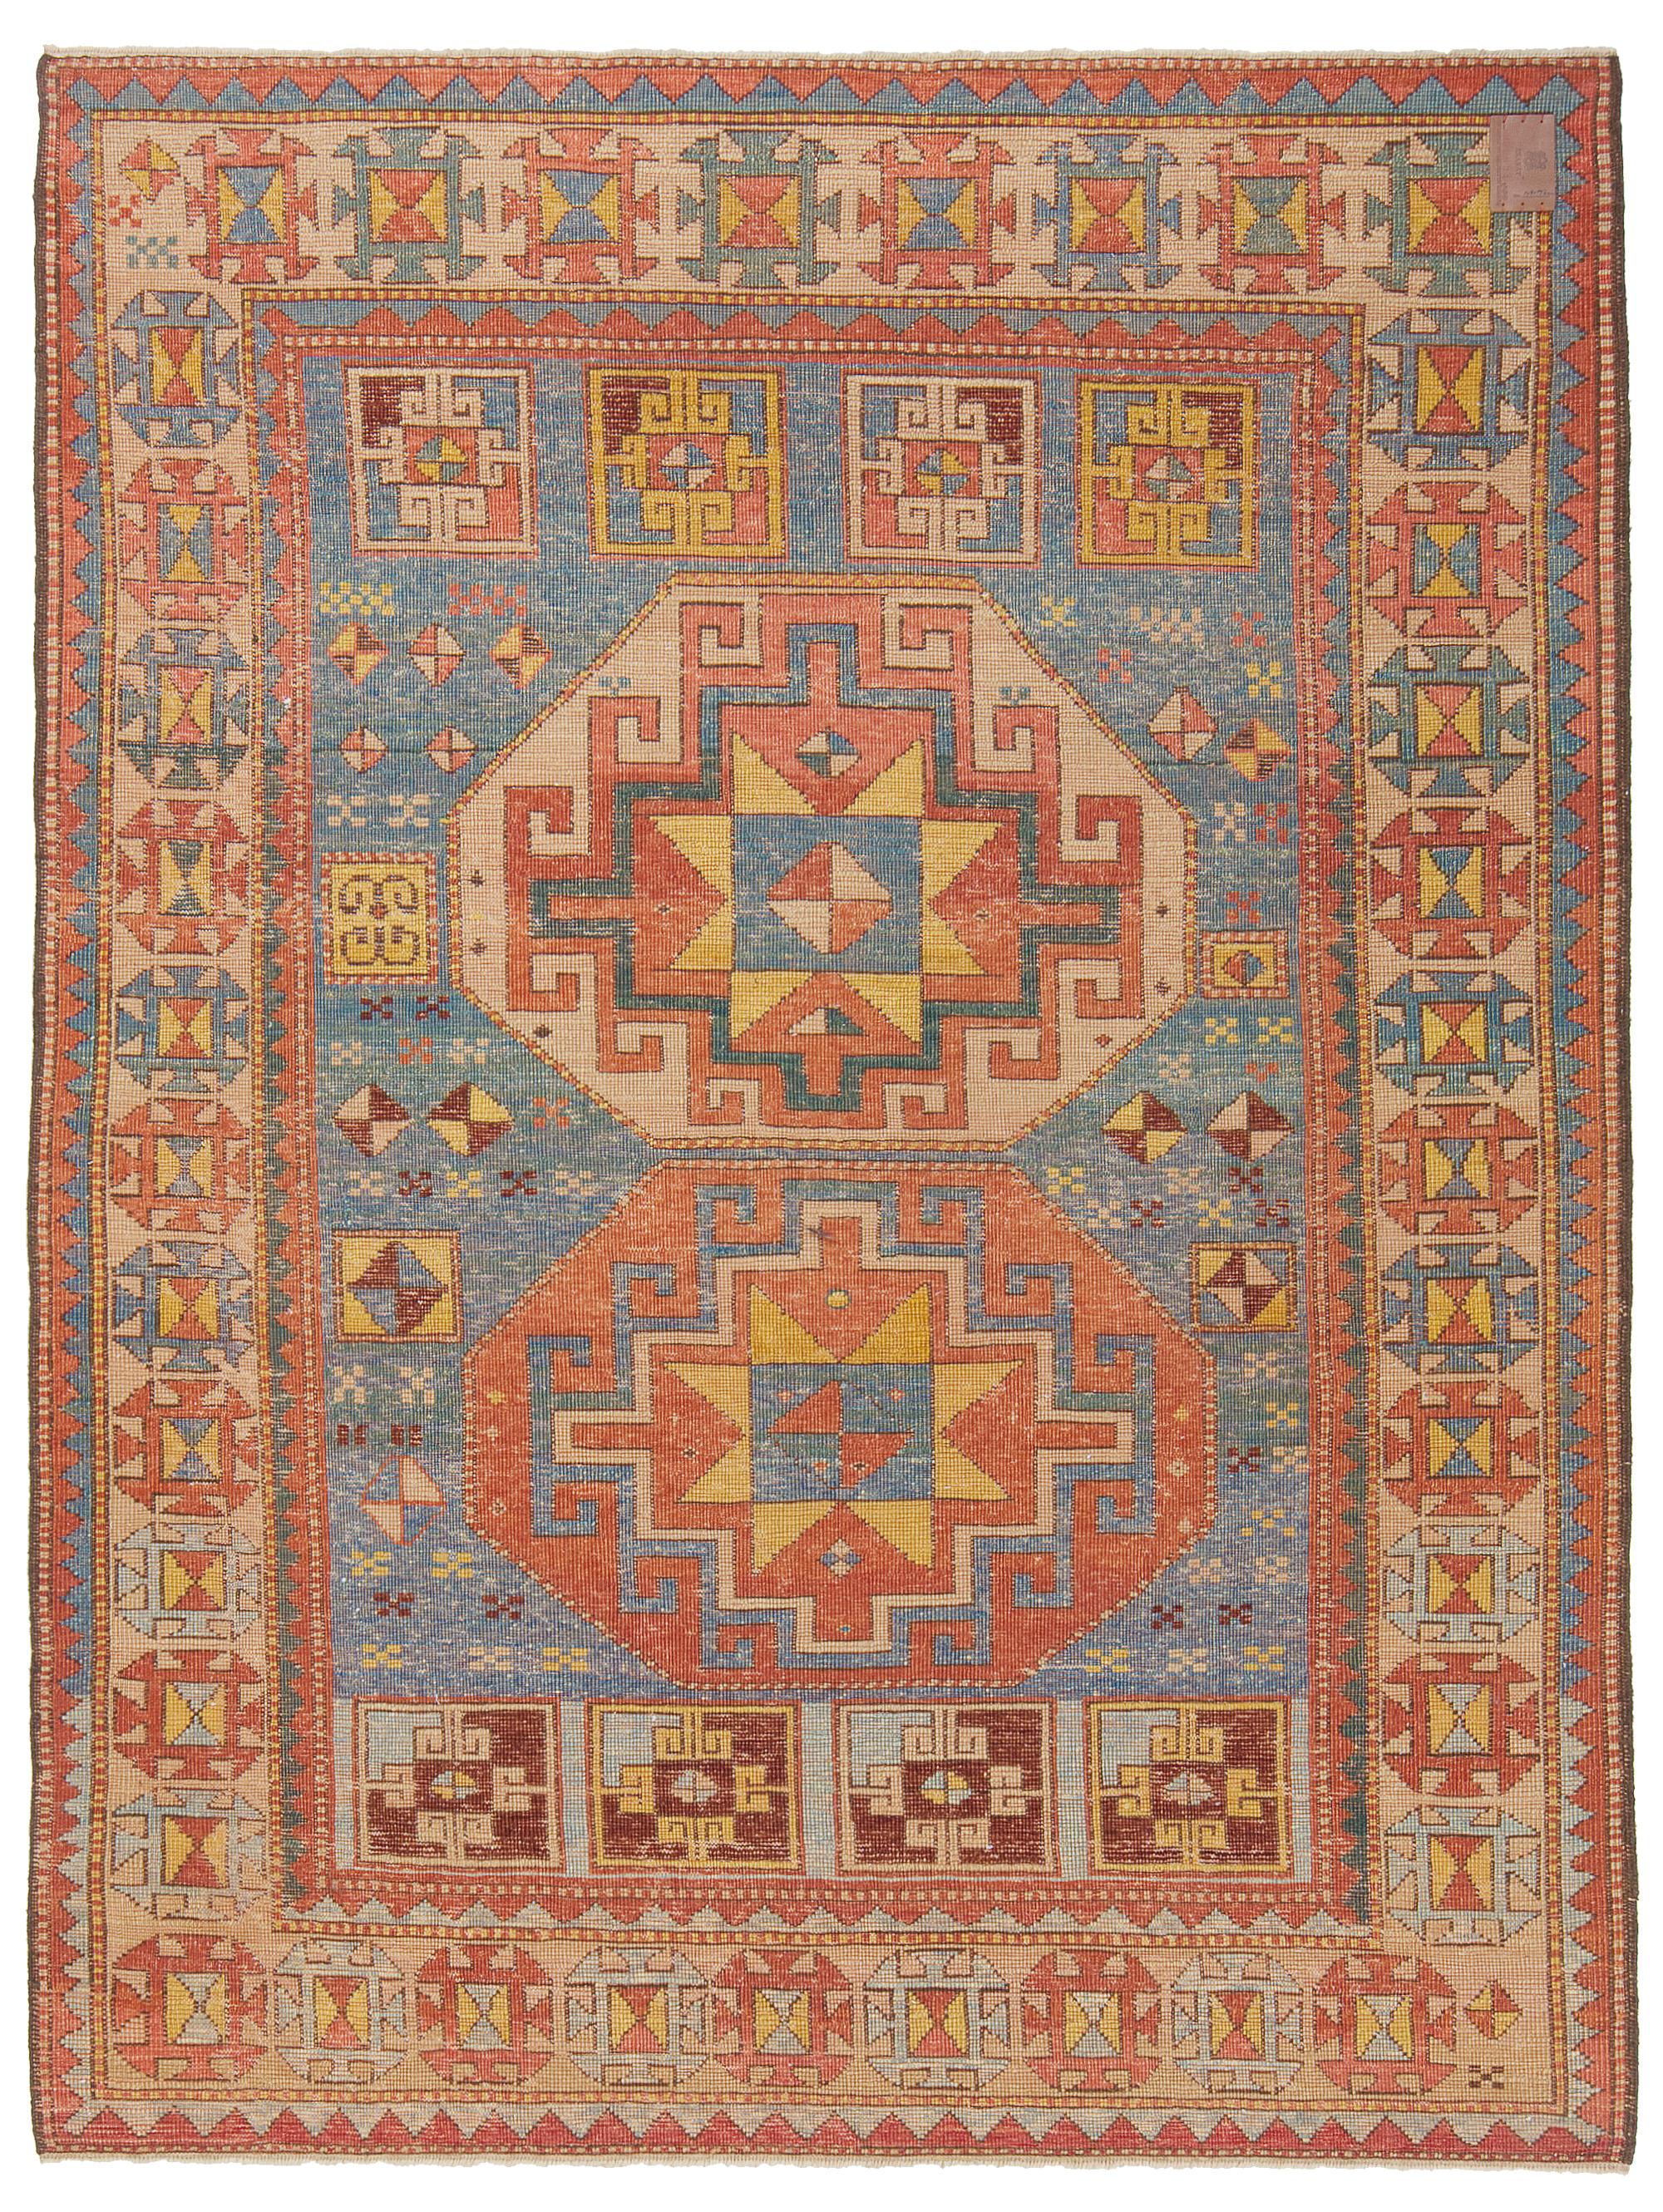 The source of the rug comes from the book Oriental Rugs Volume 1 Caucasian, Ian Bennett, Oriental Textile Press, Aberdeen 1993, nr.67 and Caucasian Carpets, E. Gans-Reudin, Thames and Hudson, Switzerland 1986, pg.68. This is a very popular Kazak